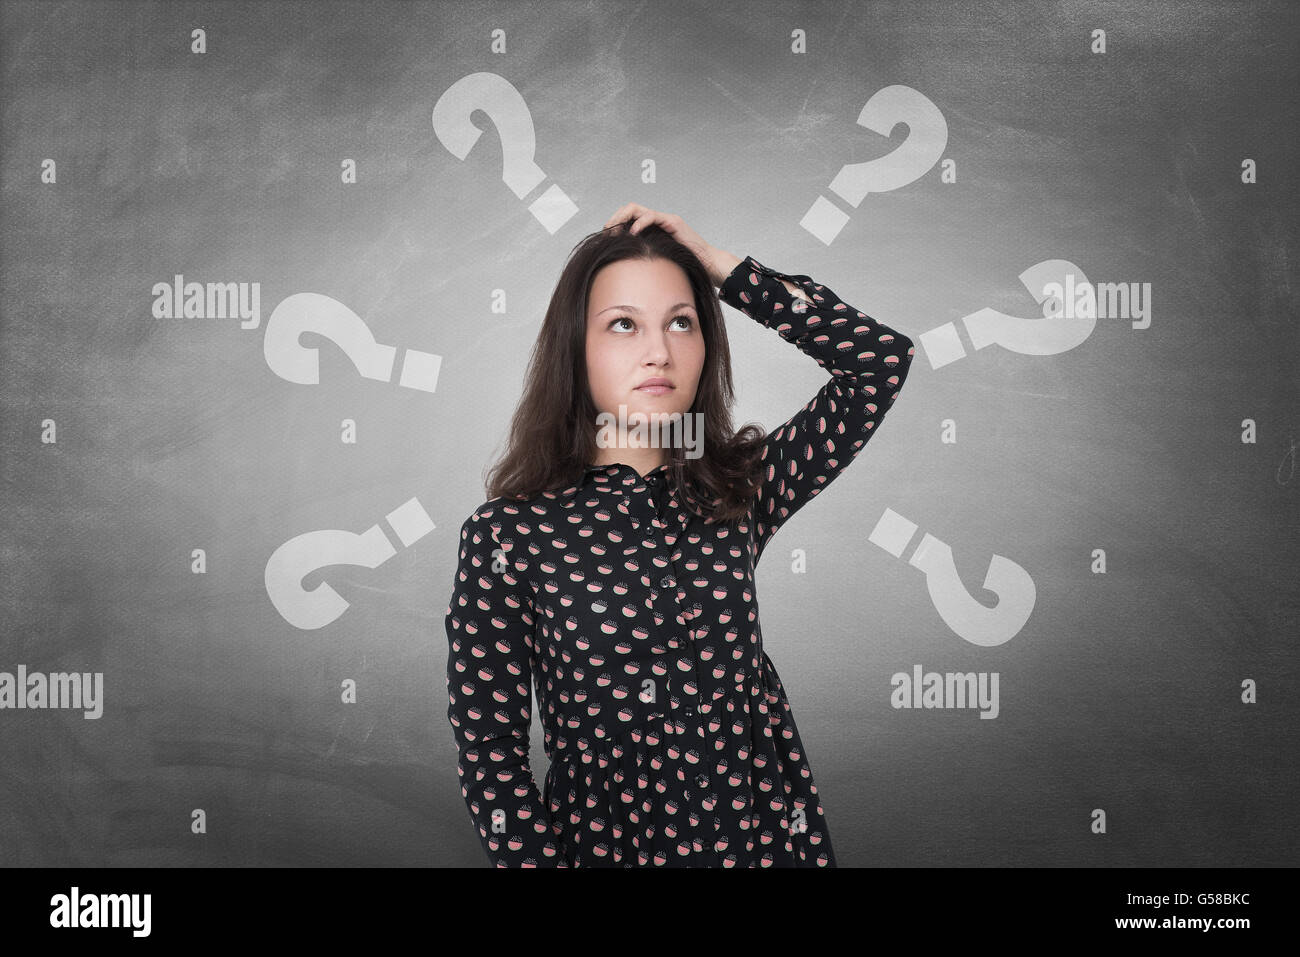 Beautiful woman with questioning expression and question marks above her head Stock Photo